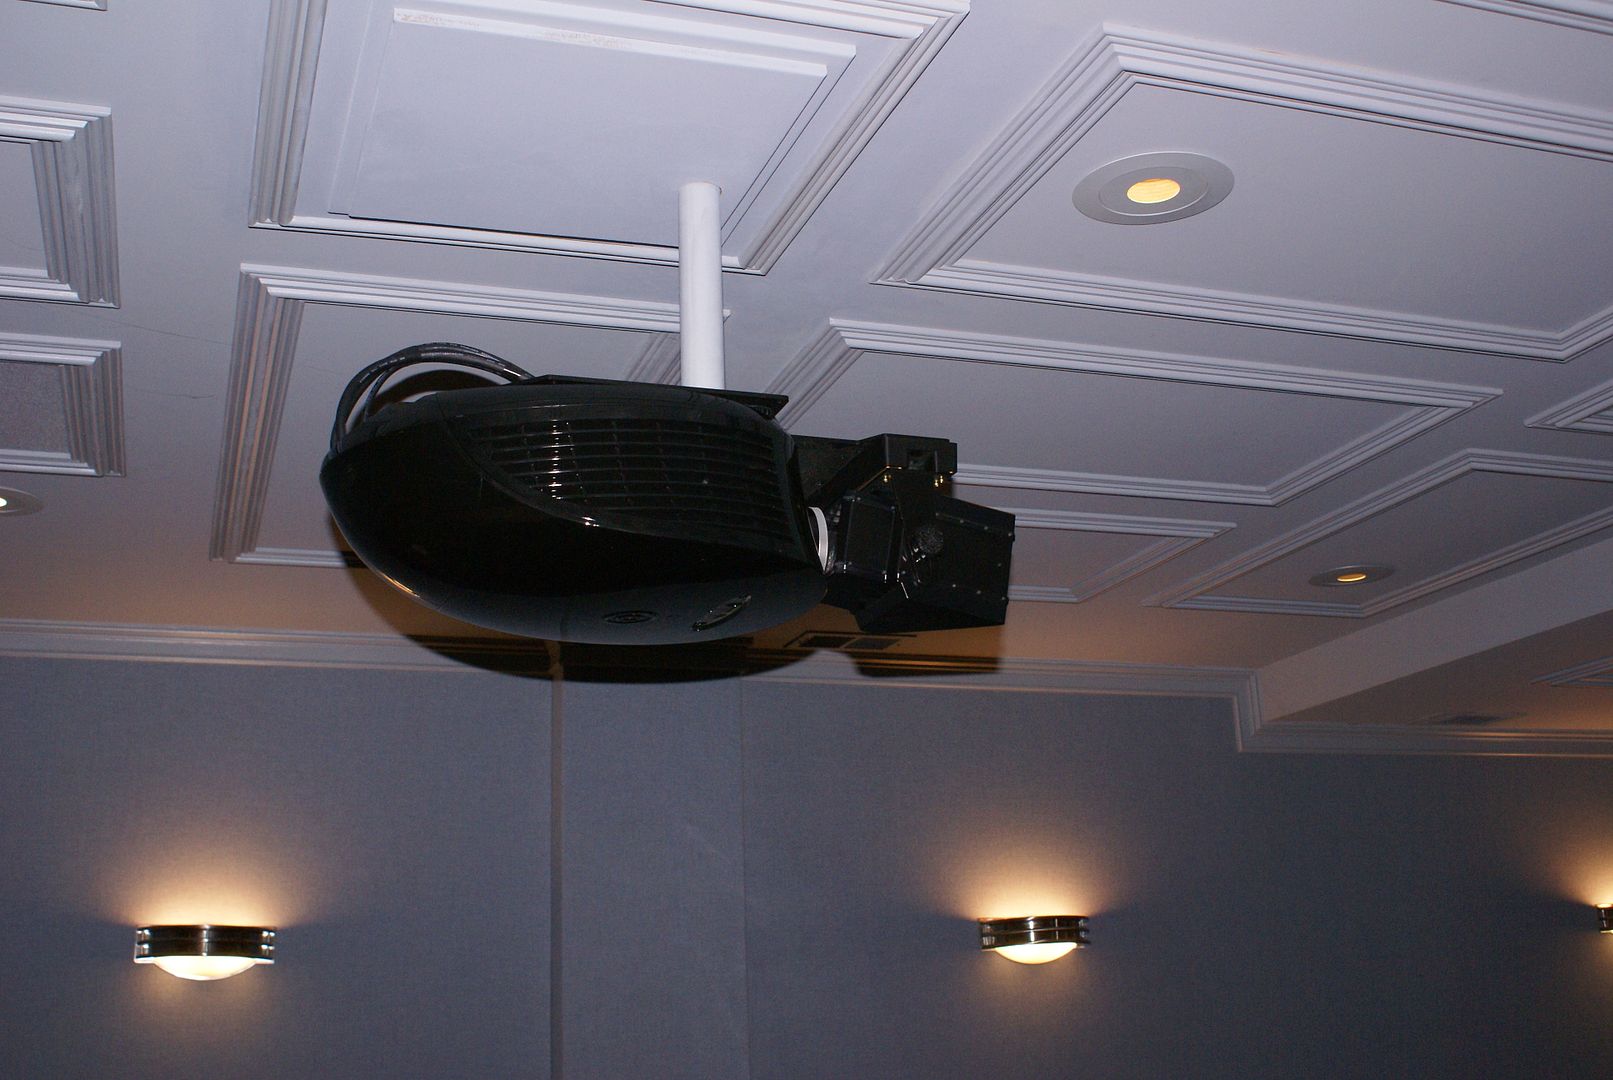 Projector Mount Issue Avs Forum Home Theater Discussions